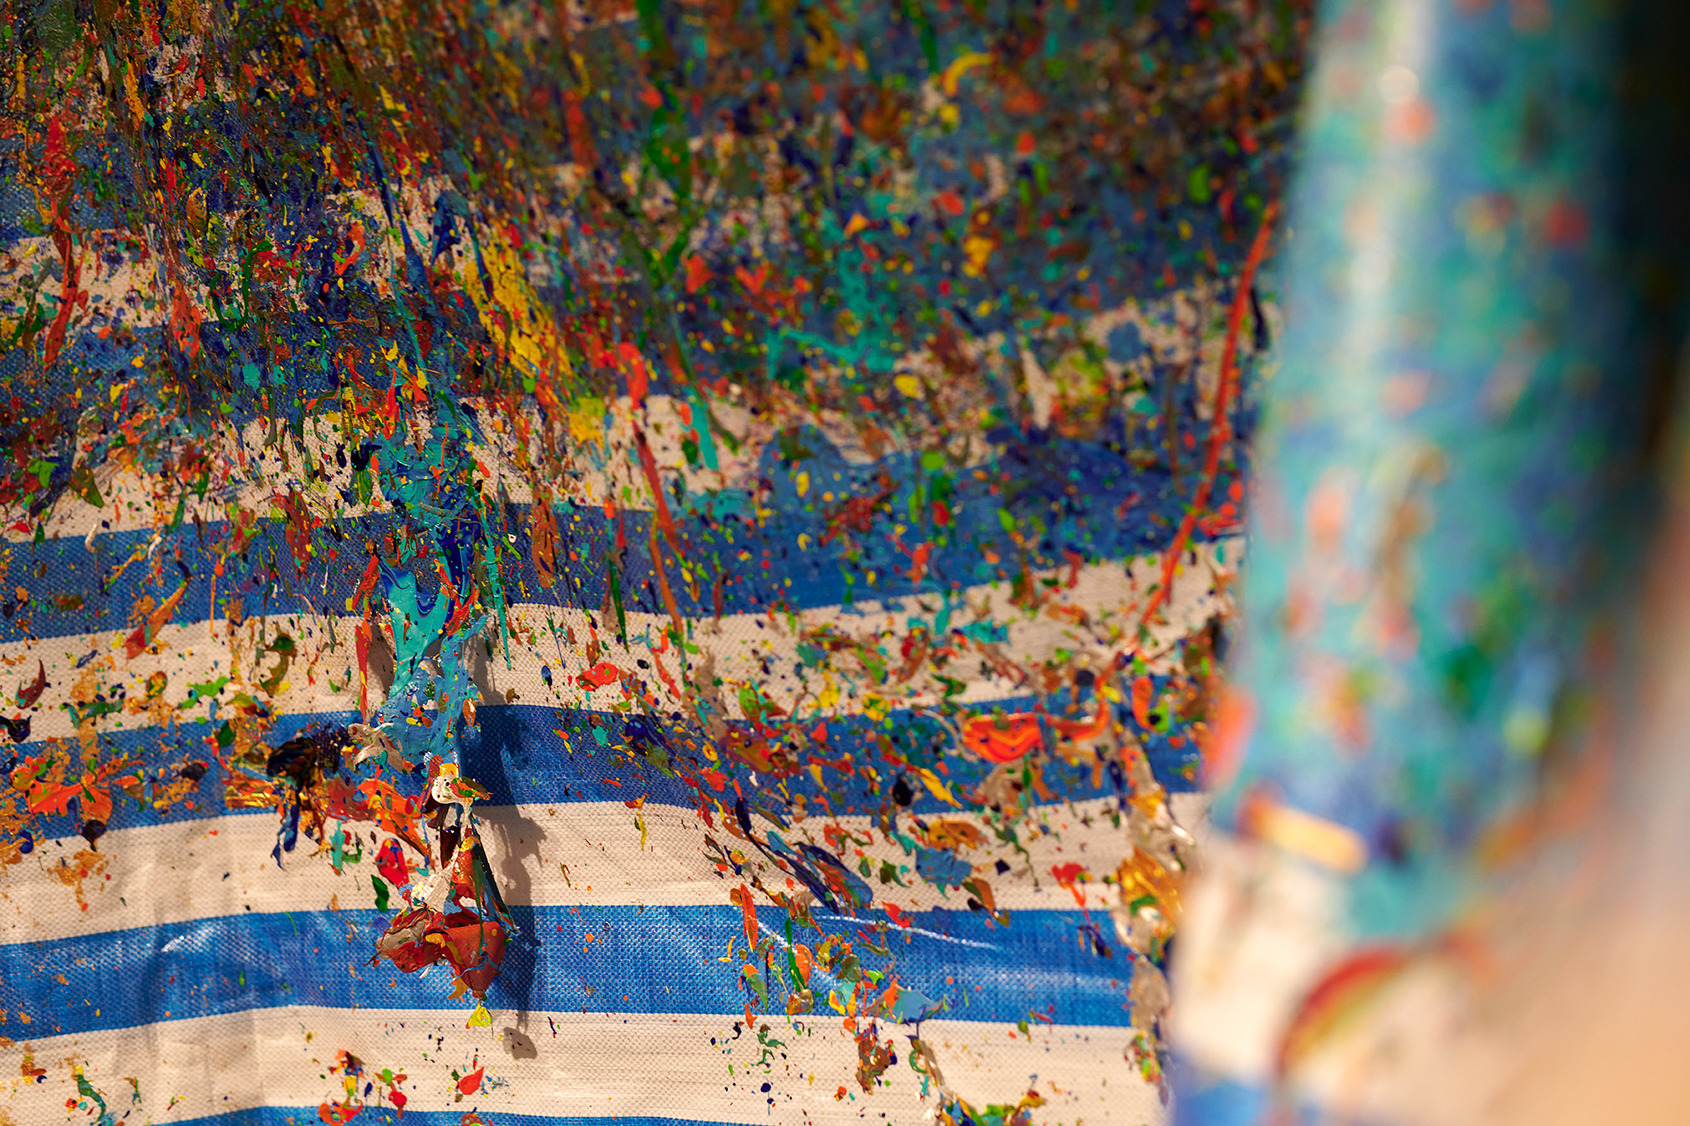 Yungtien Shao and Yaman Shao, Endless Blessings (detail), 2020, wood, canvas, acrylic paint, dimensions variable 